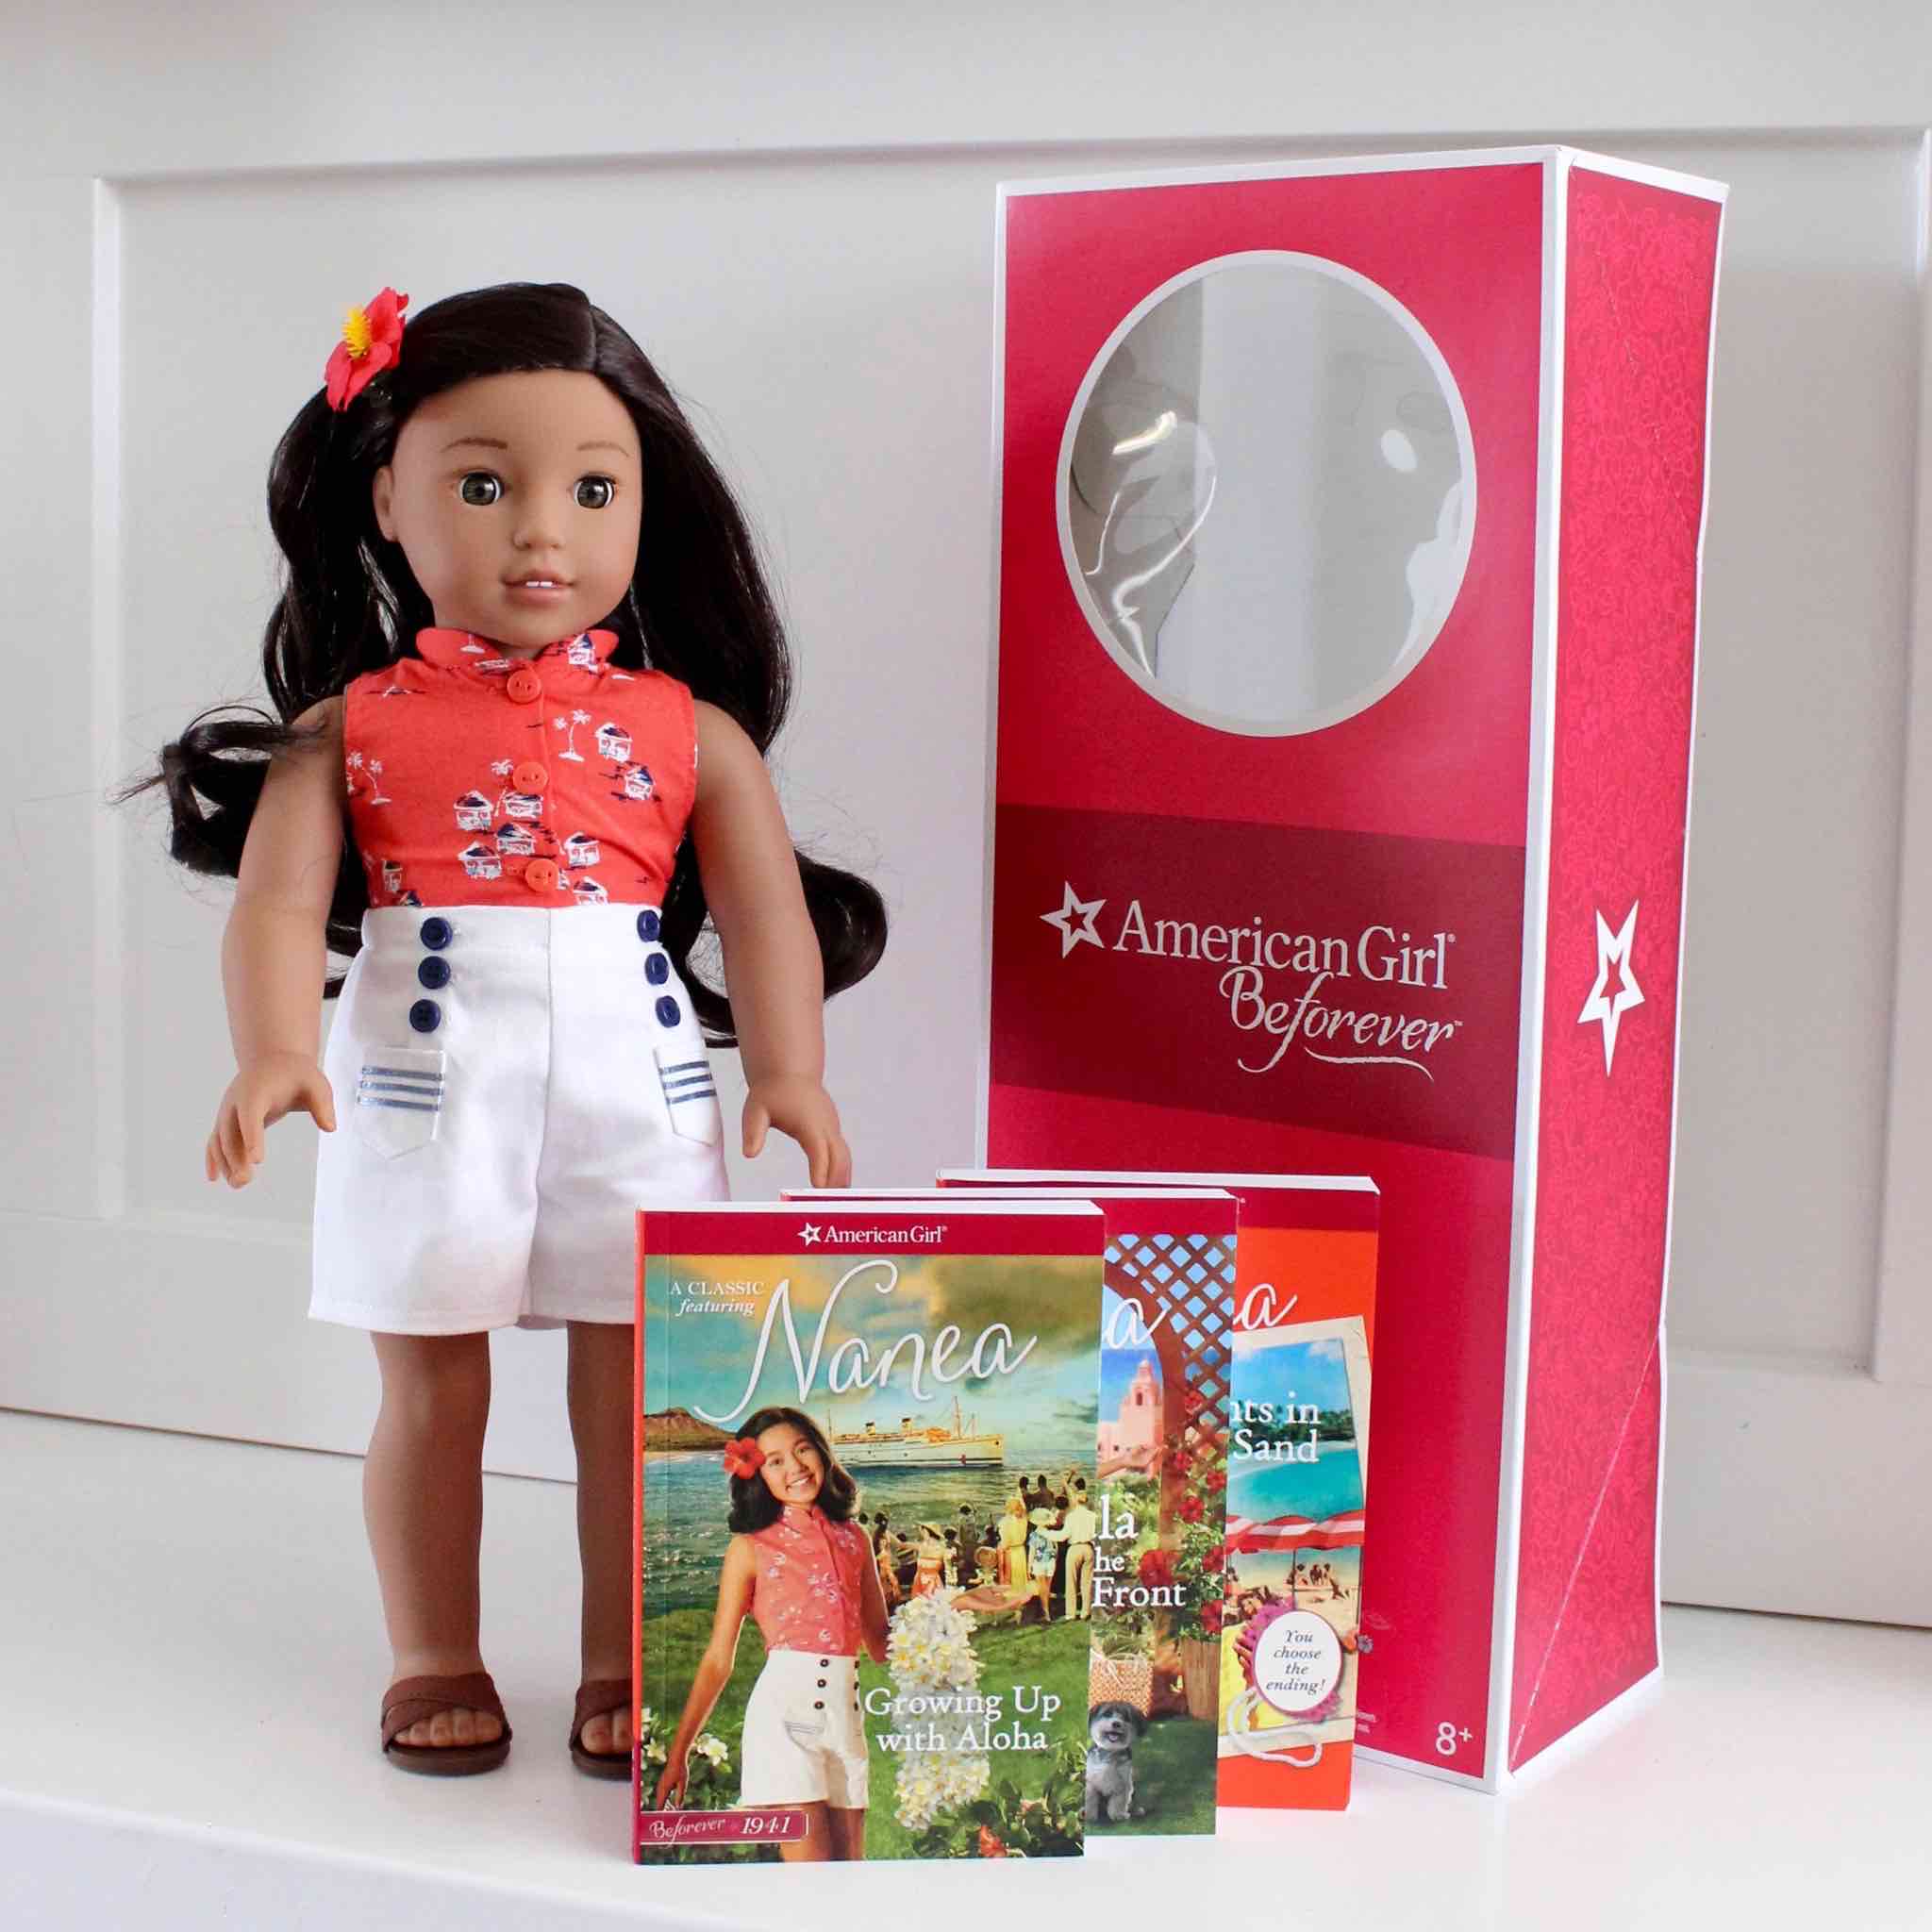 Doll and book review: American Girl's Nanea offers first-hand look